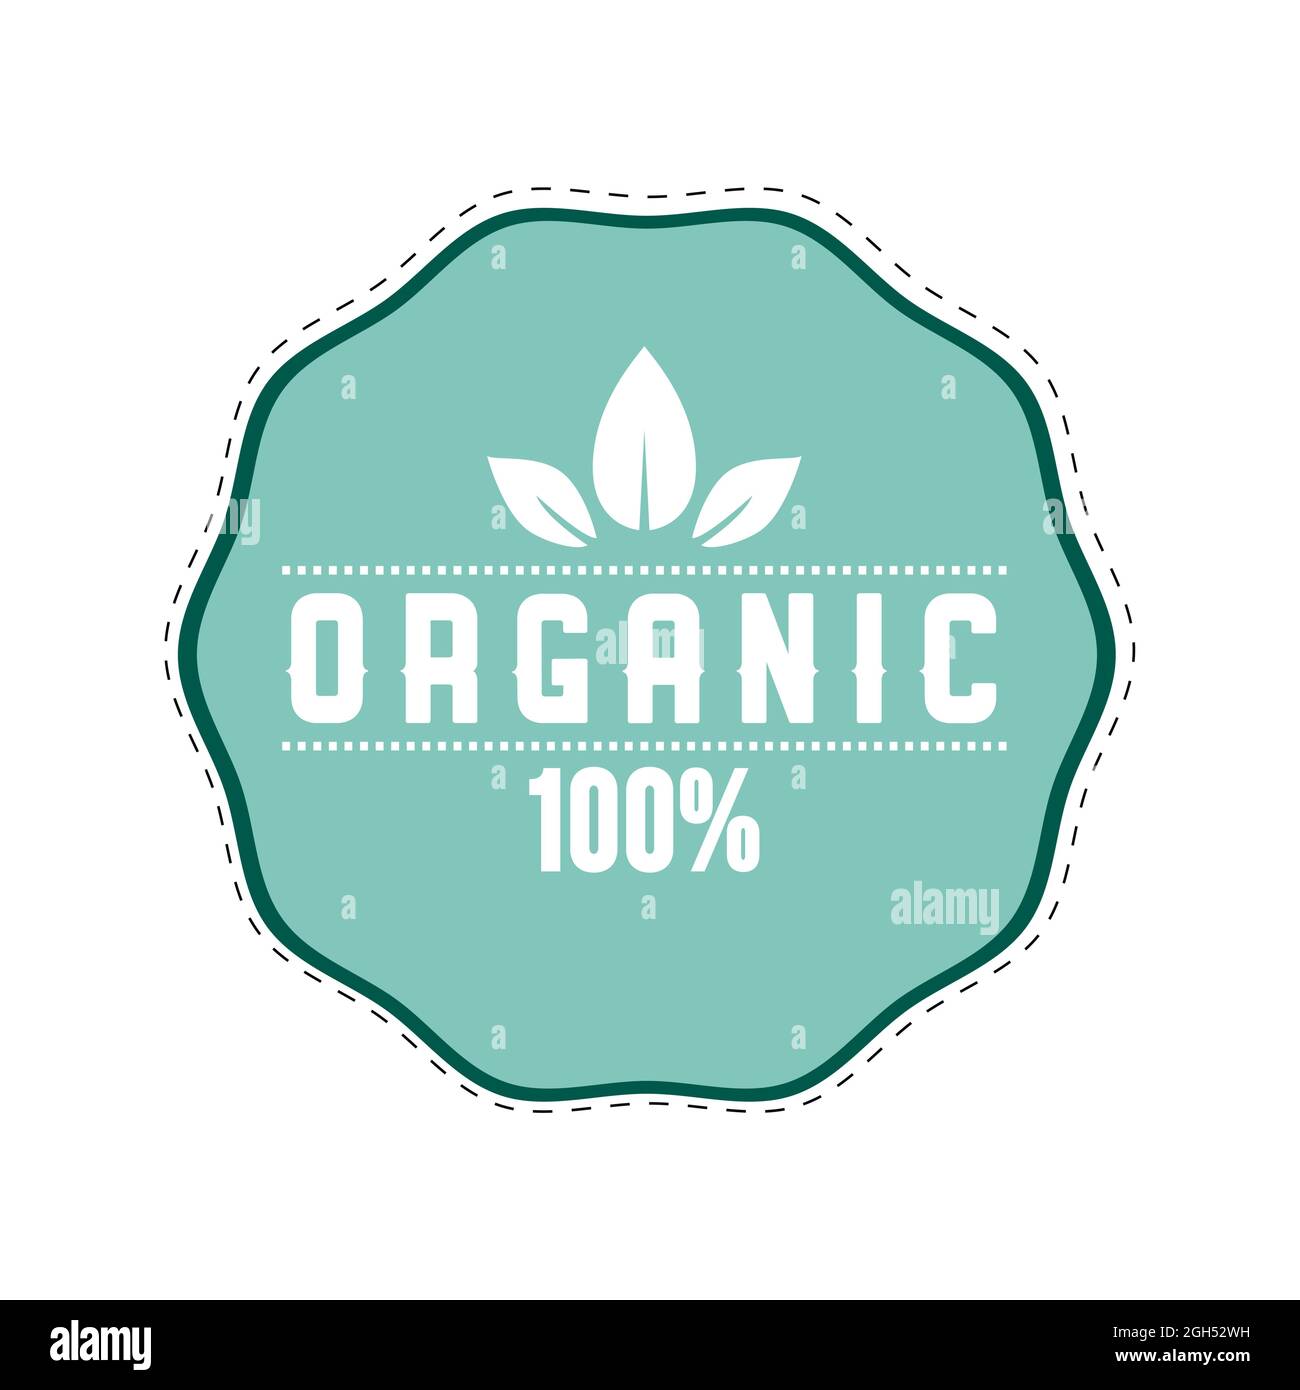 Organic label icon to mark veggie food isolated on white. Vector eco business icon for mel food in restaurant, label with text, round mark illustratio Stock Vector